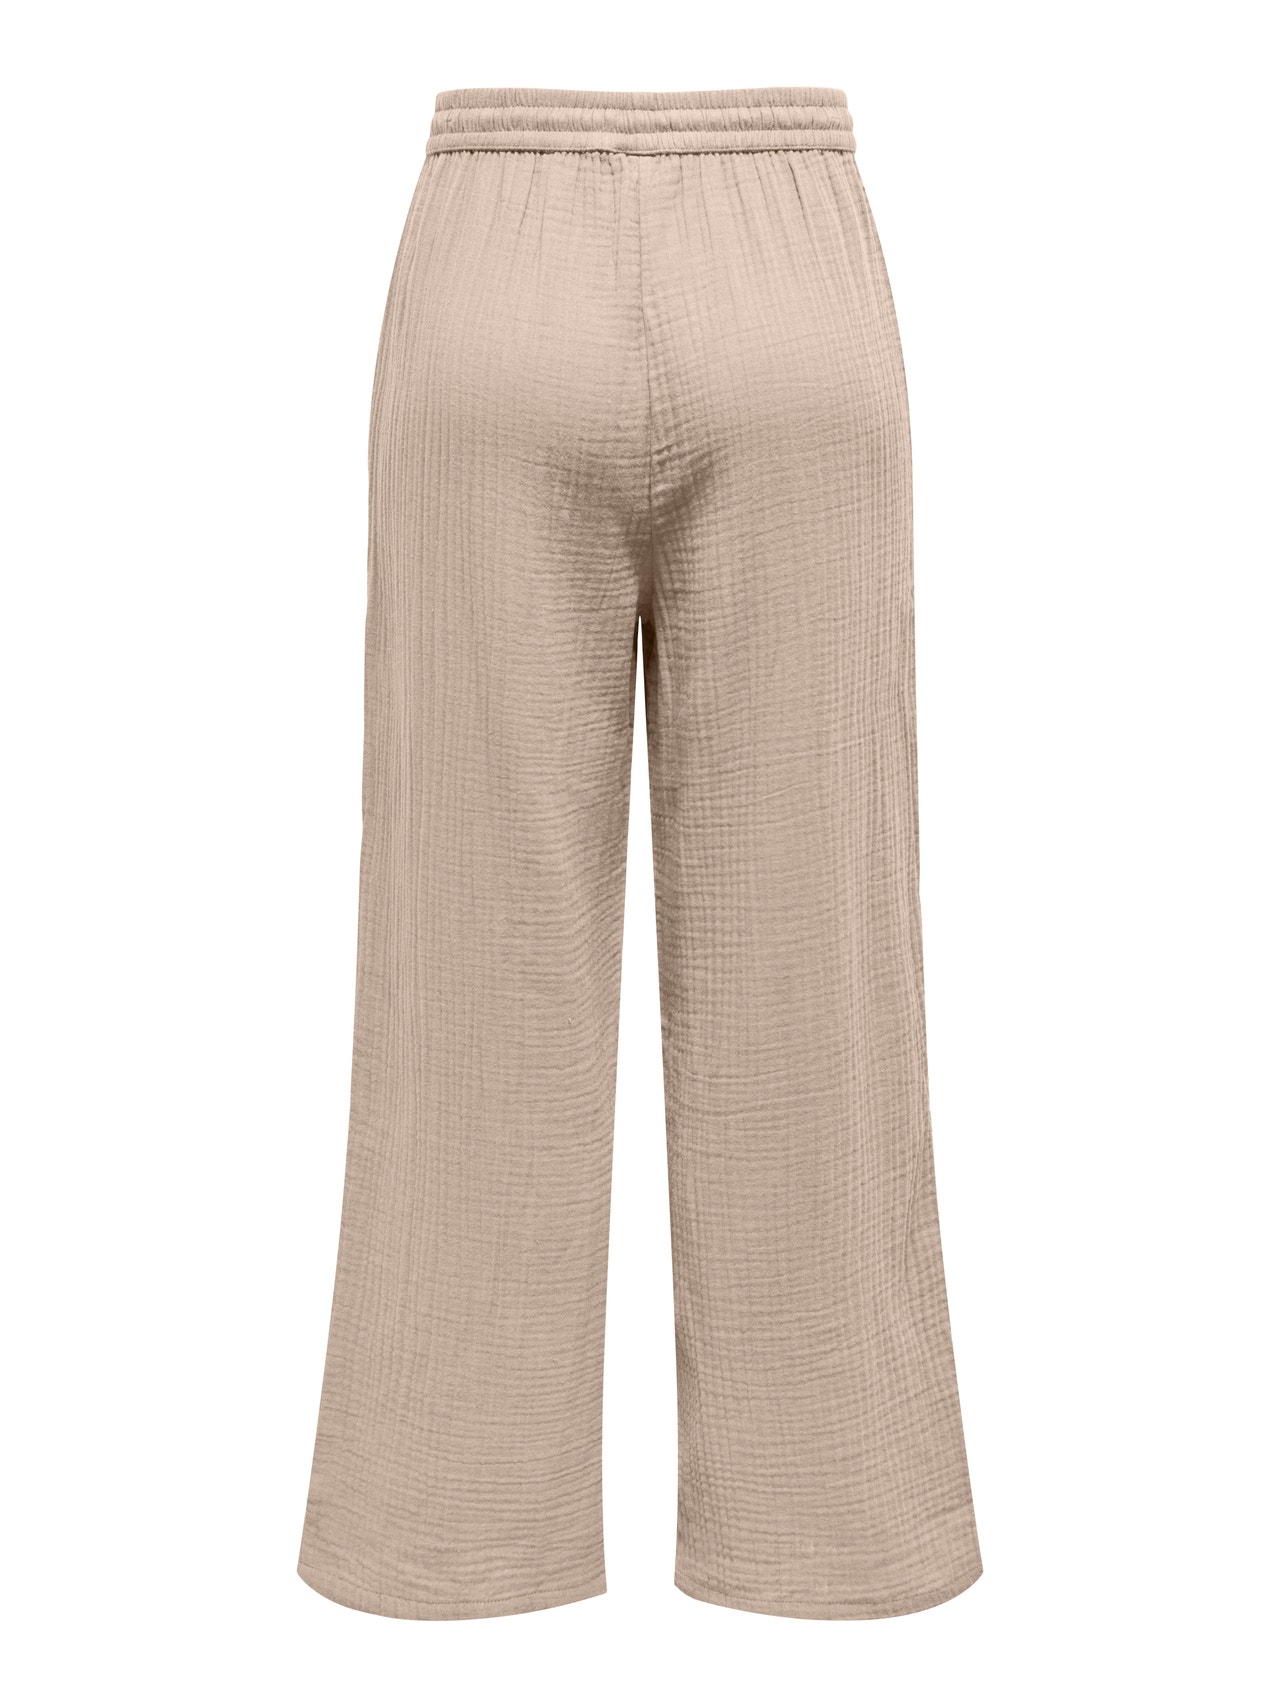 ONLY Pantalons Comfort Fit -Oxford Tan - 15296375